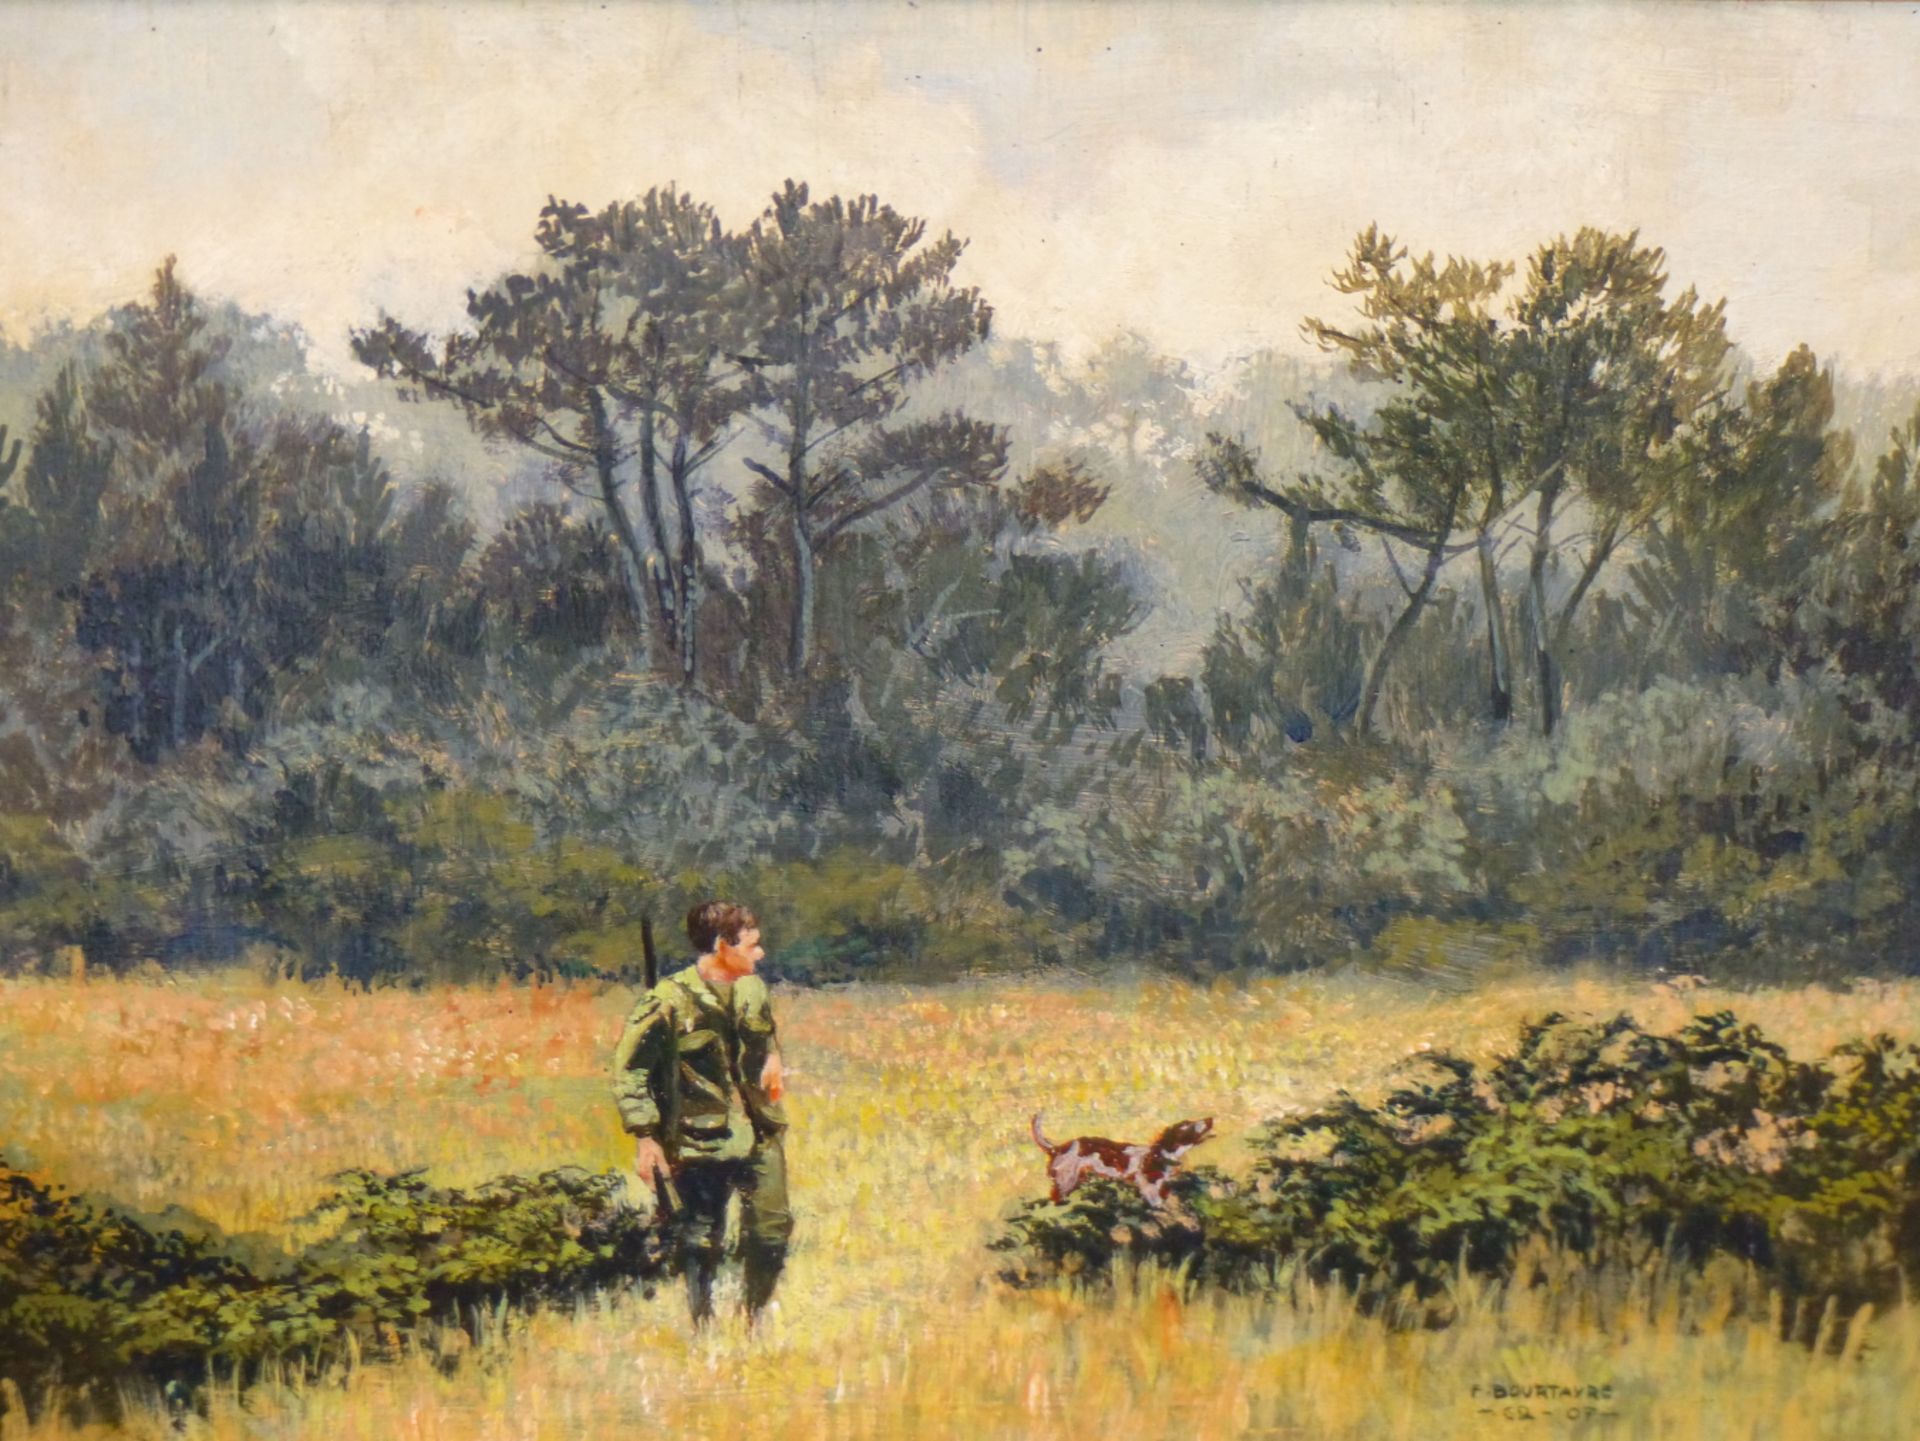 F. BOURTAYRE, 20TH C. GAMEKEEPER AND DOG. OIL ON PANEL, 23 X 29 CM. - Image 2 of 4